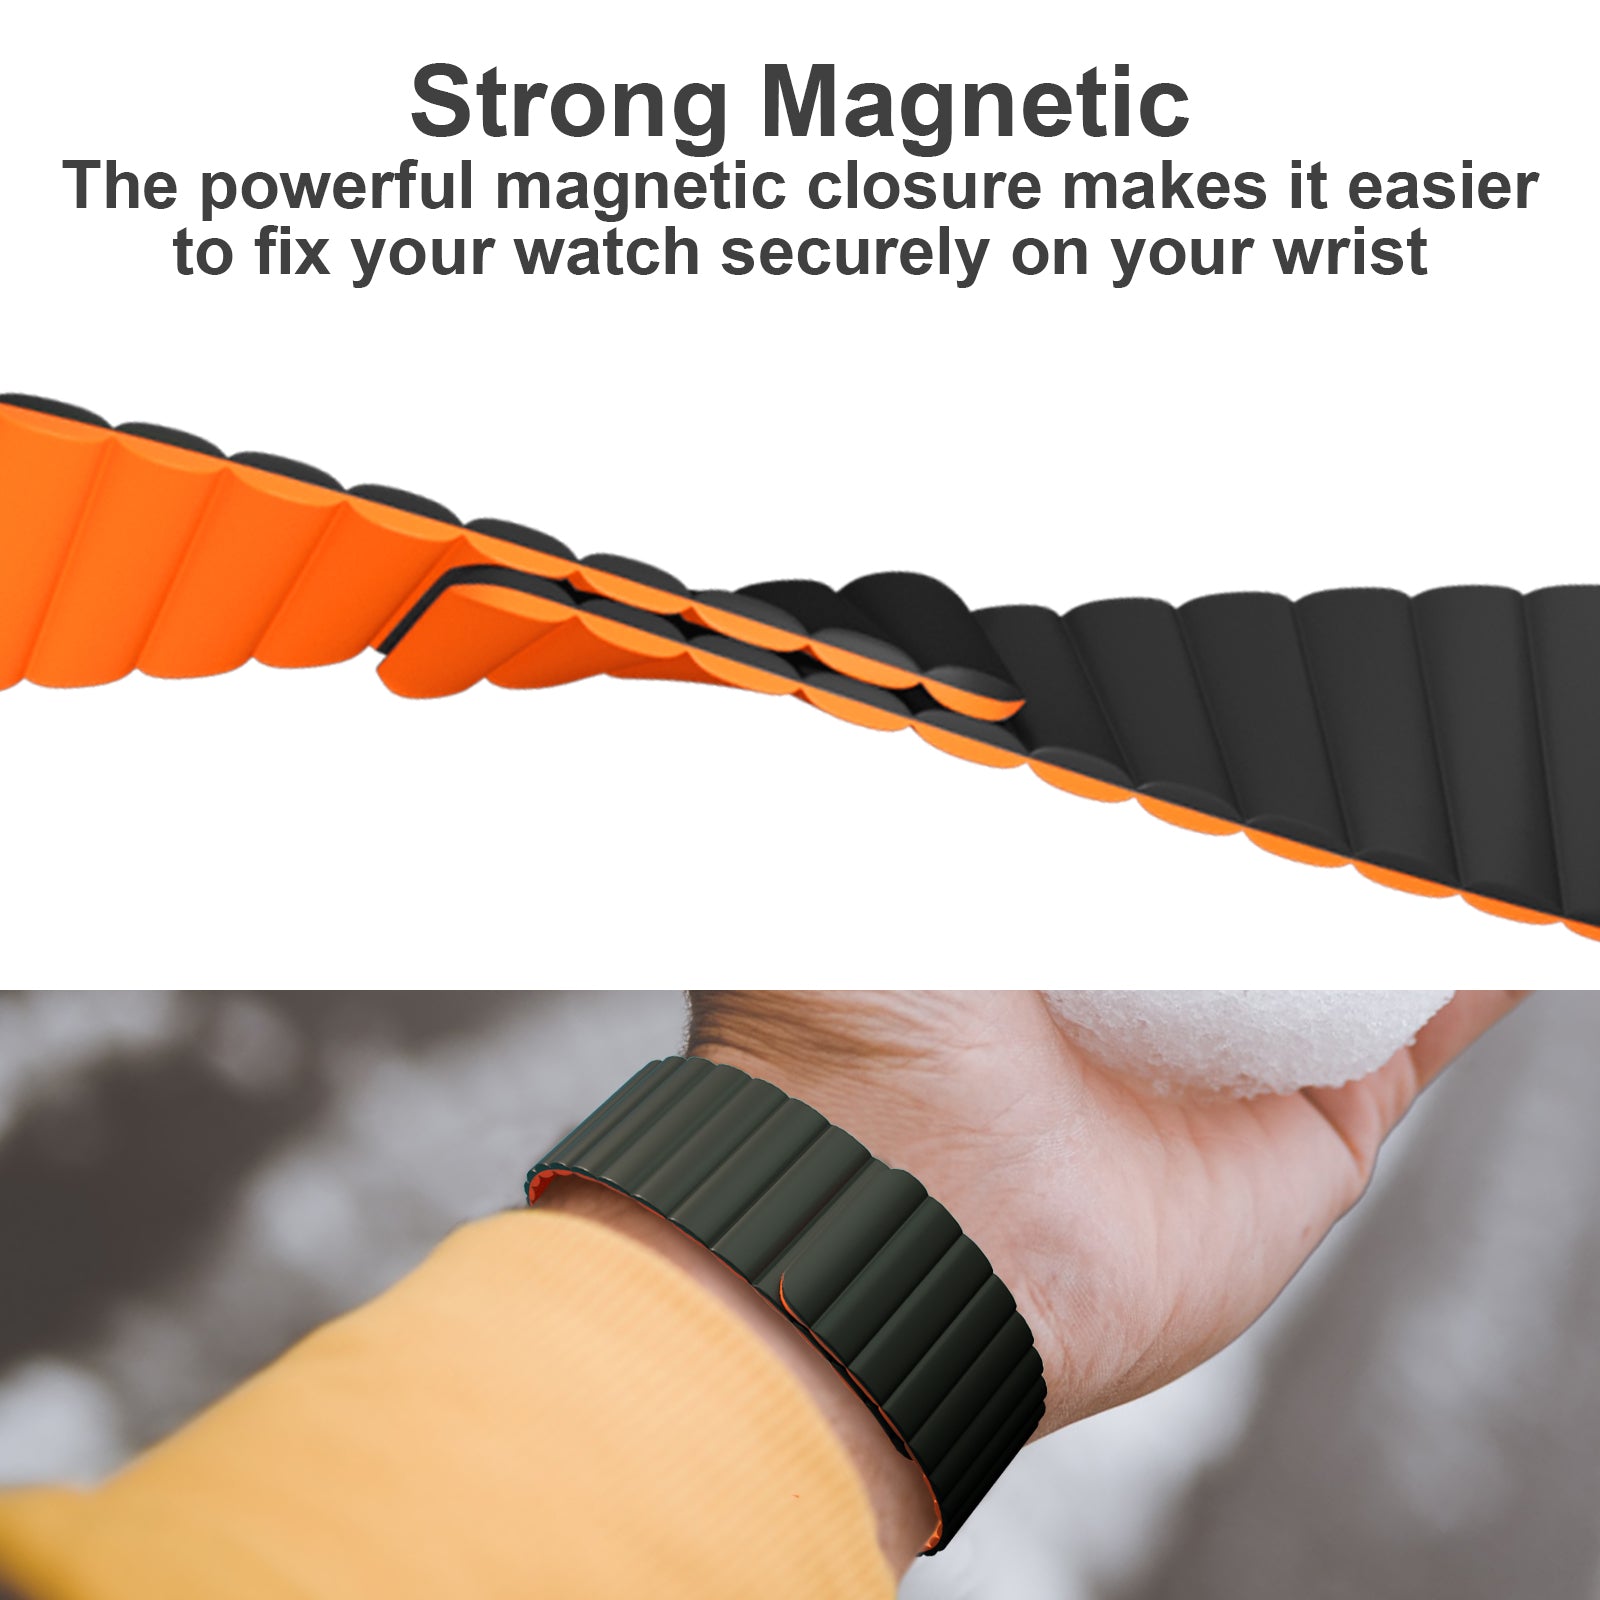 The powerful magnetic closure makes it easier to fix your watch securely on your wrist